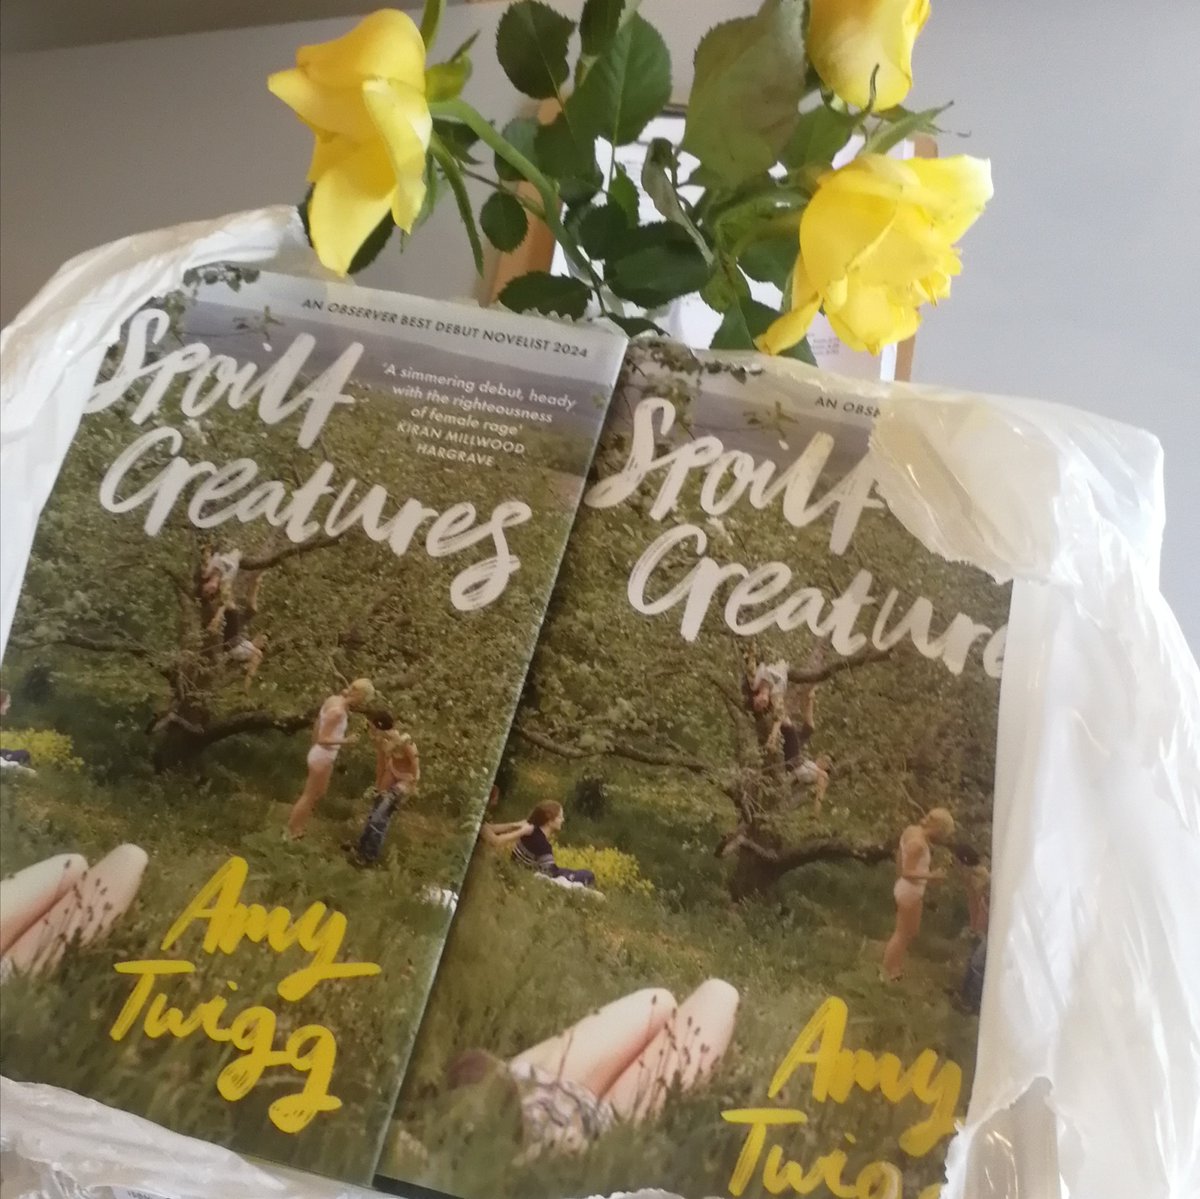 SO EXCITED that these books have arrived and looking forward to our event, chatting all things SPOILT CREATURES with @aetwigg - Weds 19/06 at 18:30 Don't miss your chance to get involved with this simmering debut full of female rage... Tickets 👇